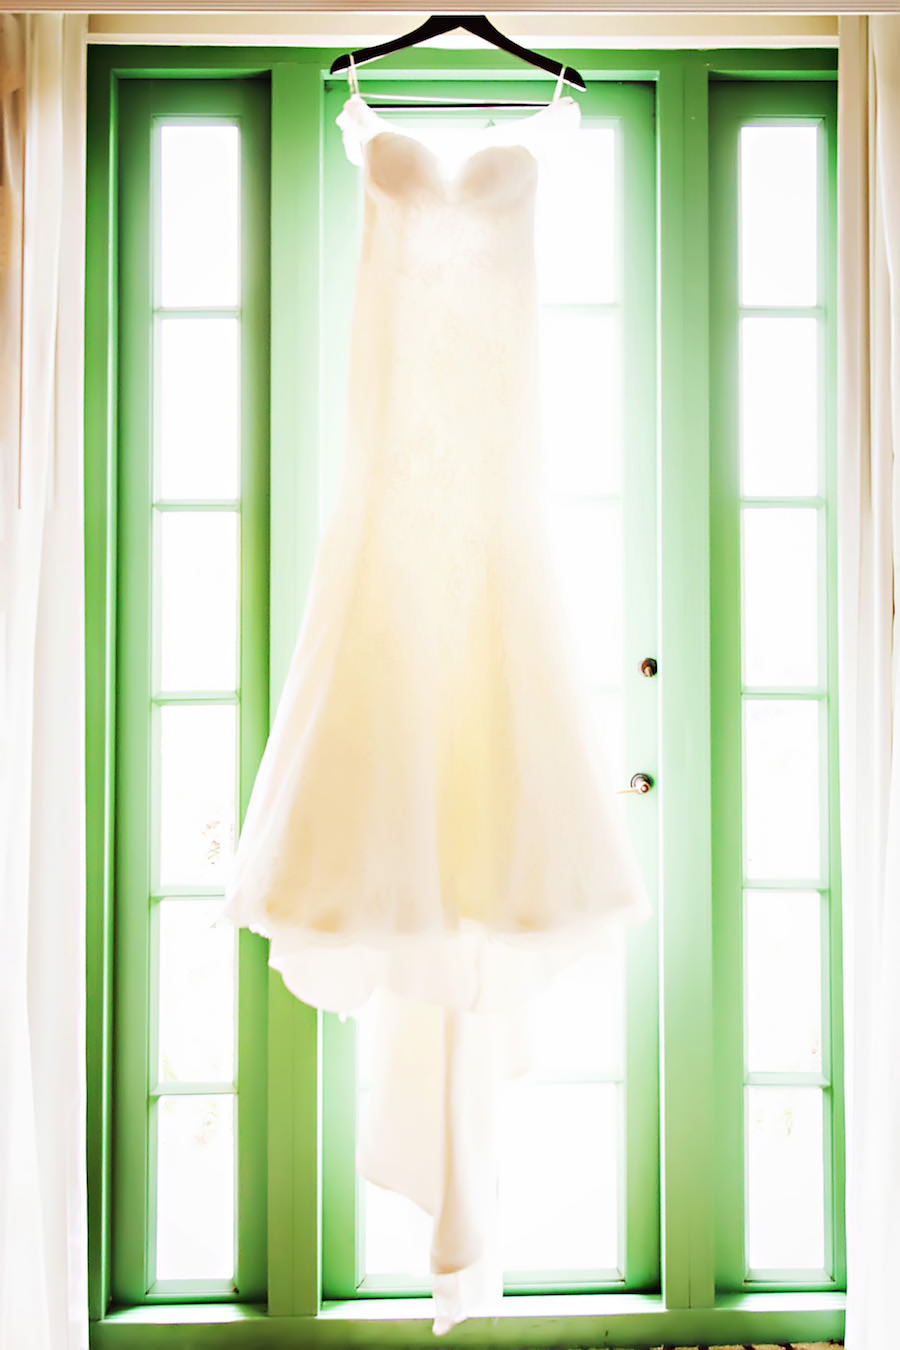 White Trumpet Style Augusta Jones Wedding Dress with Scalloped Lace Neckline, Cap Sleeves and Cathedral Train